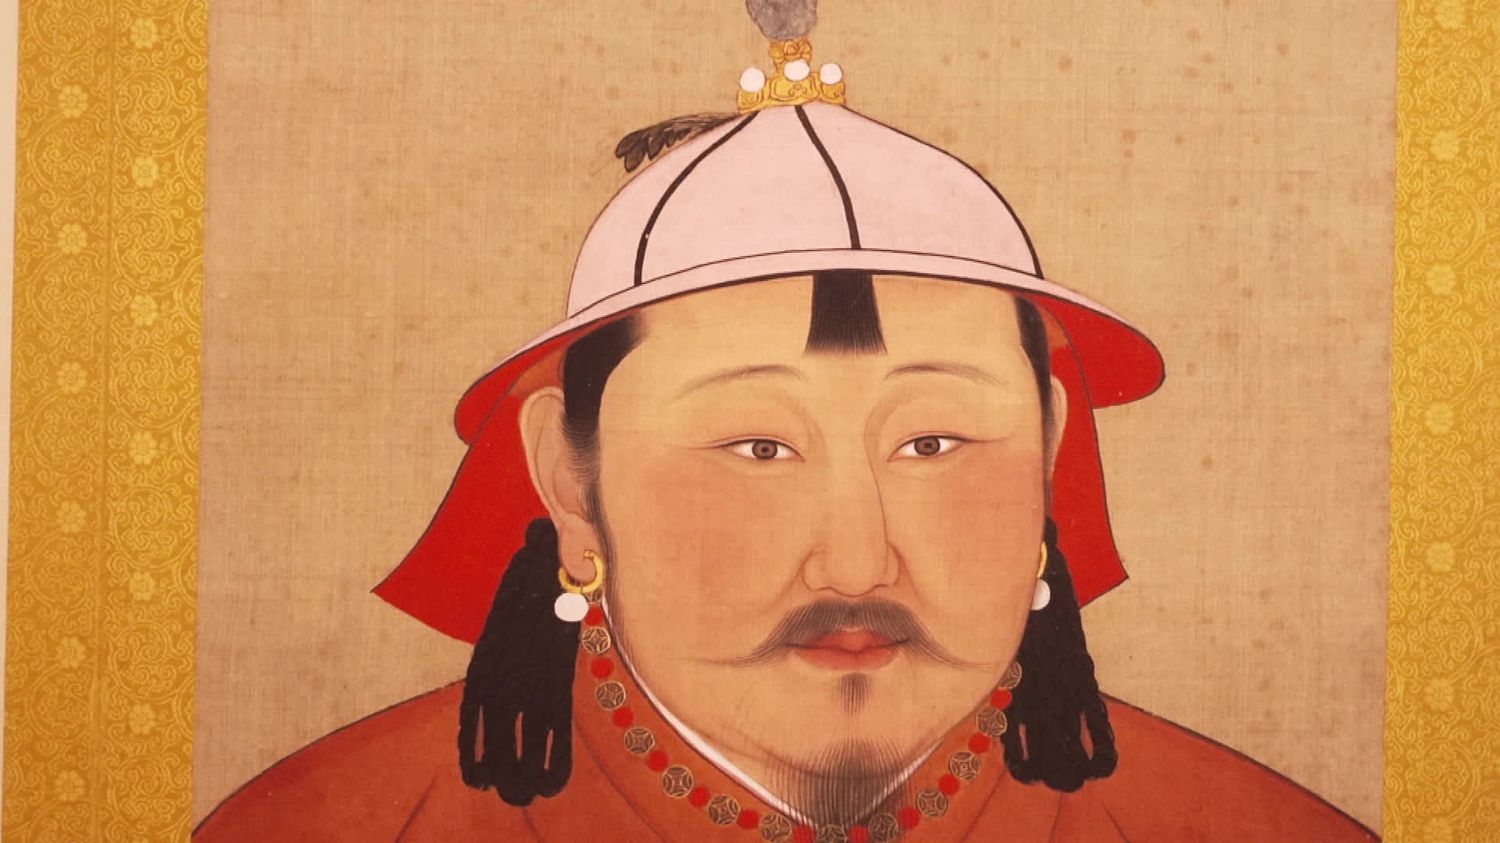 At the Nantes History Museum, an exhibition explains how the Mongols changed the world under Genghis Khan